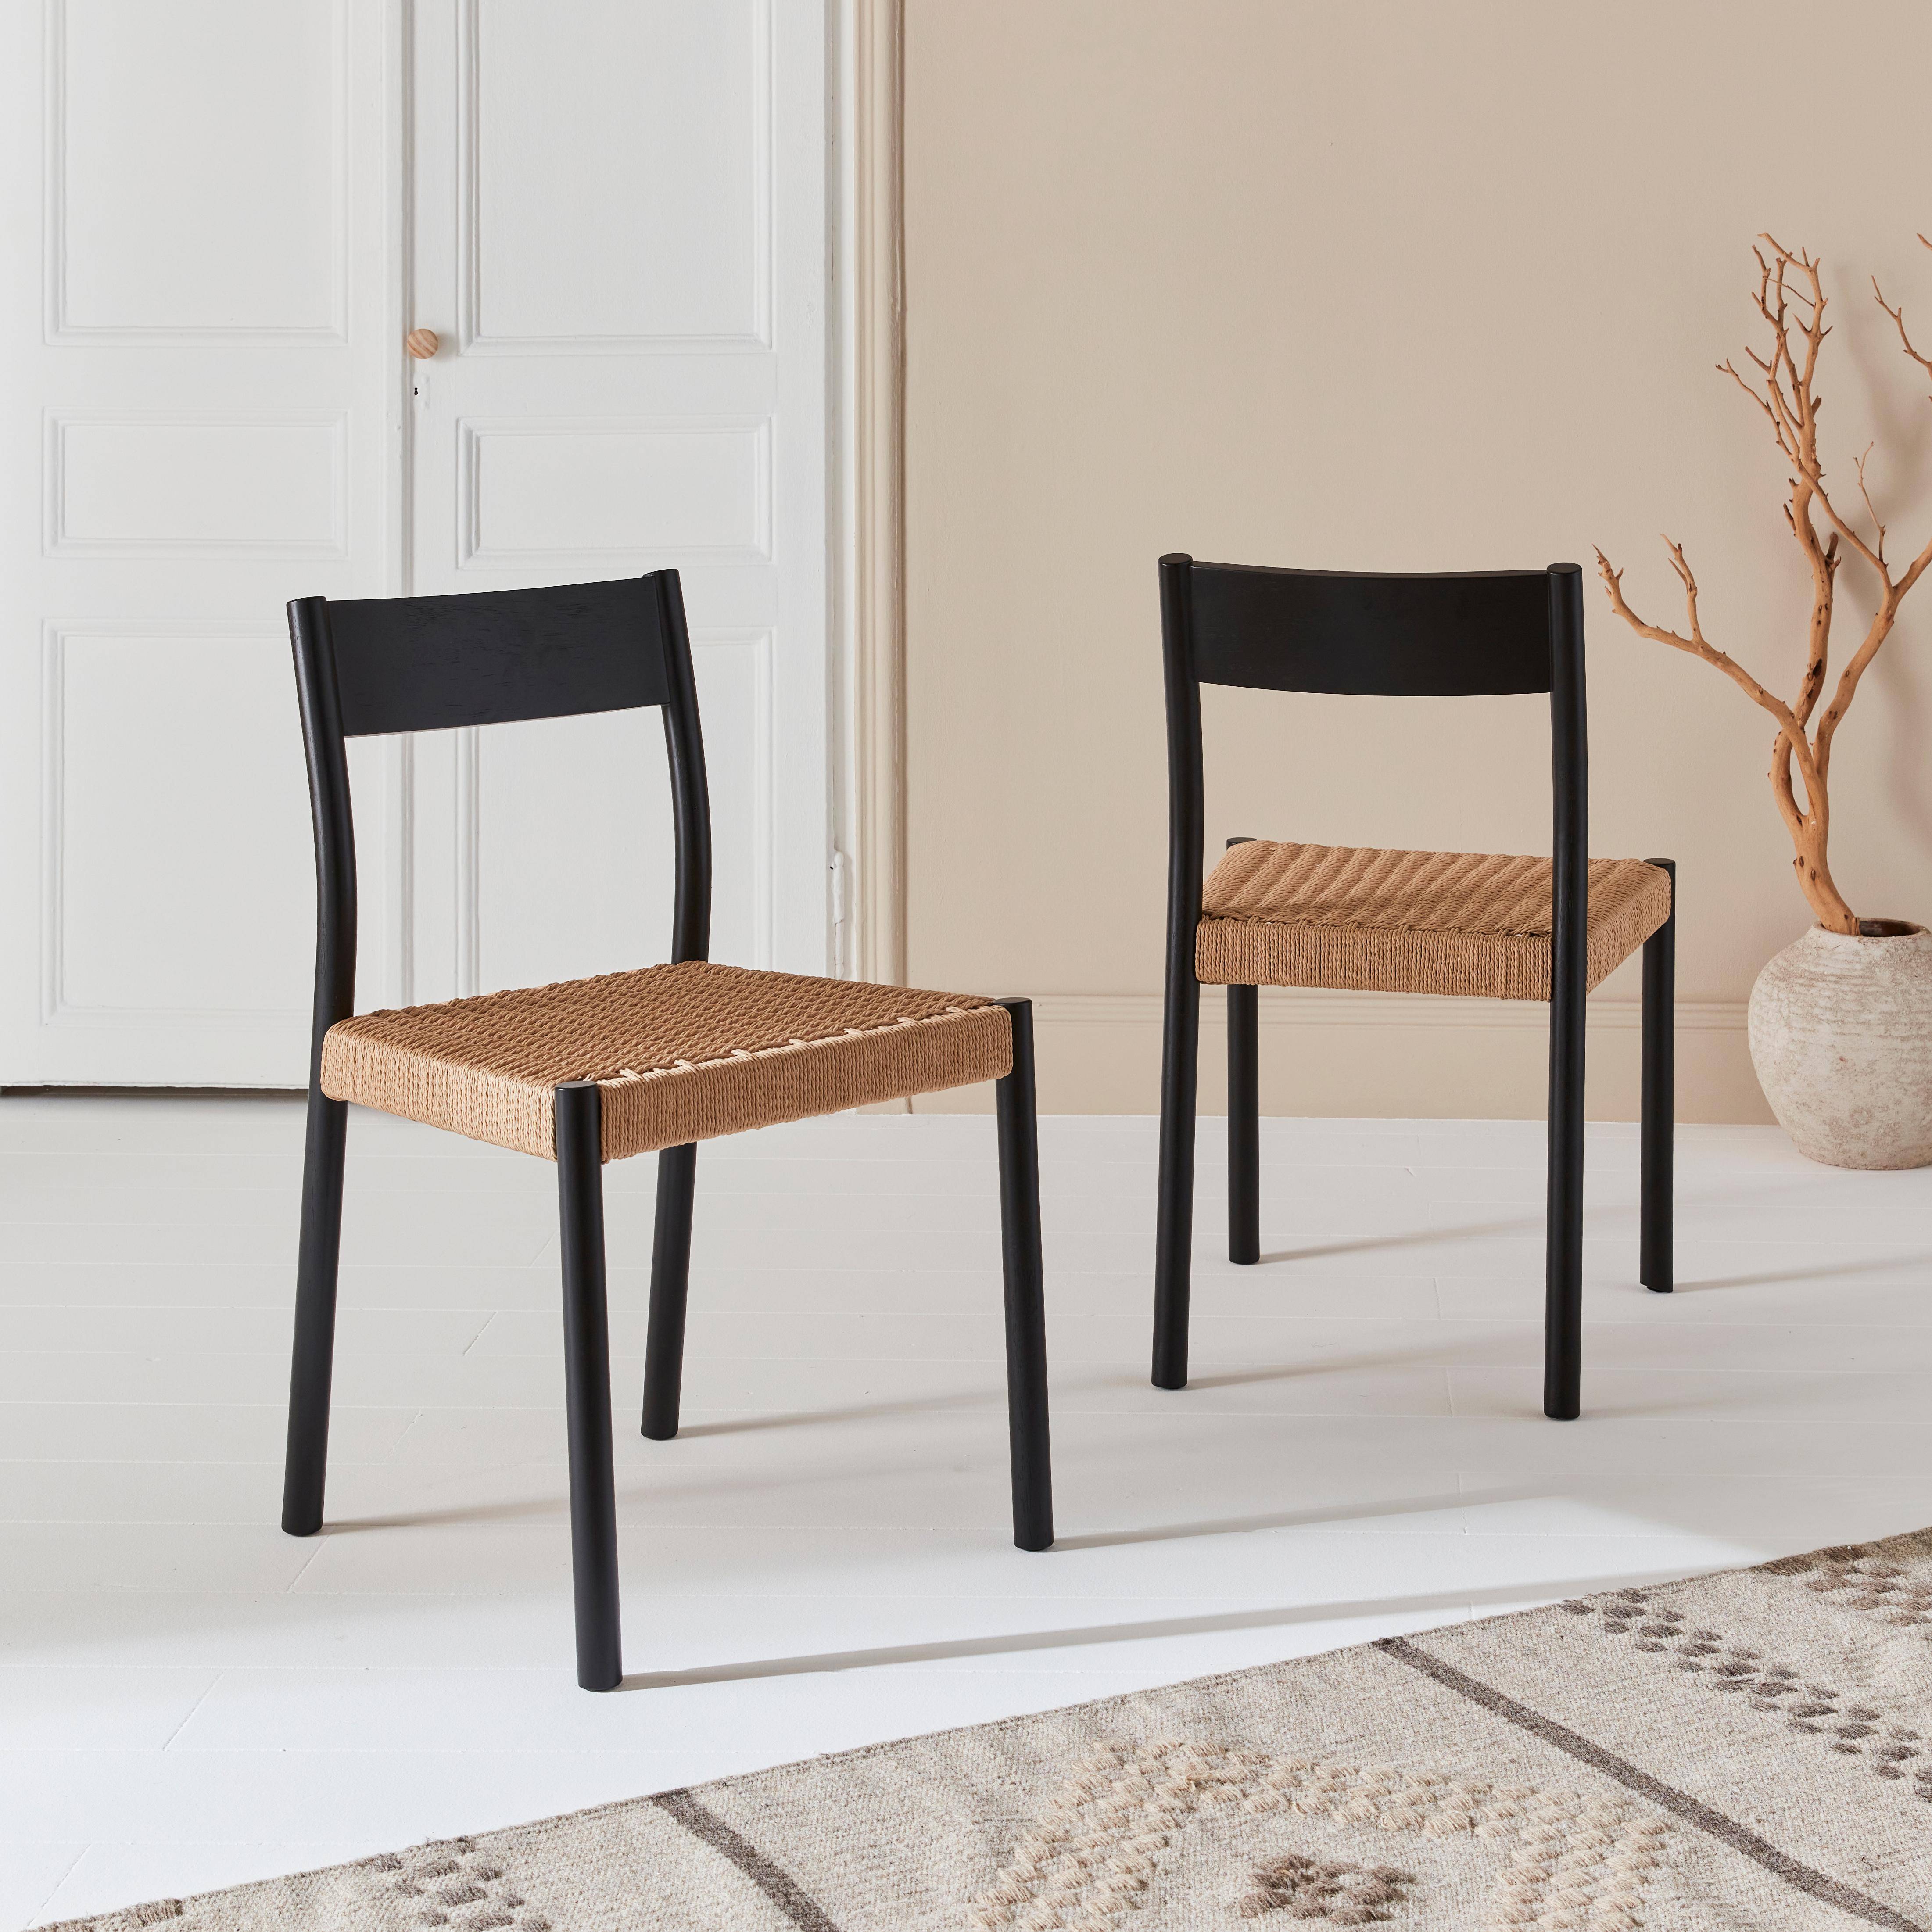 Pair of timeless design Wood and Rope Dining Room chairs, L49.5 x W53 x H82 cm, black,sweeek,Photo1